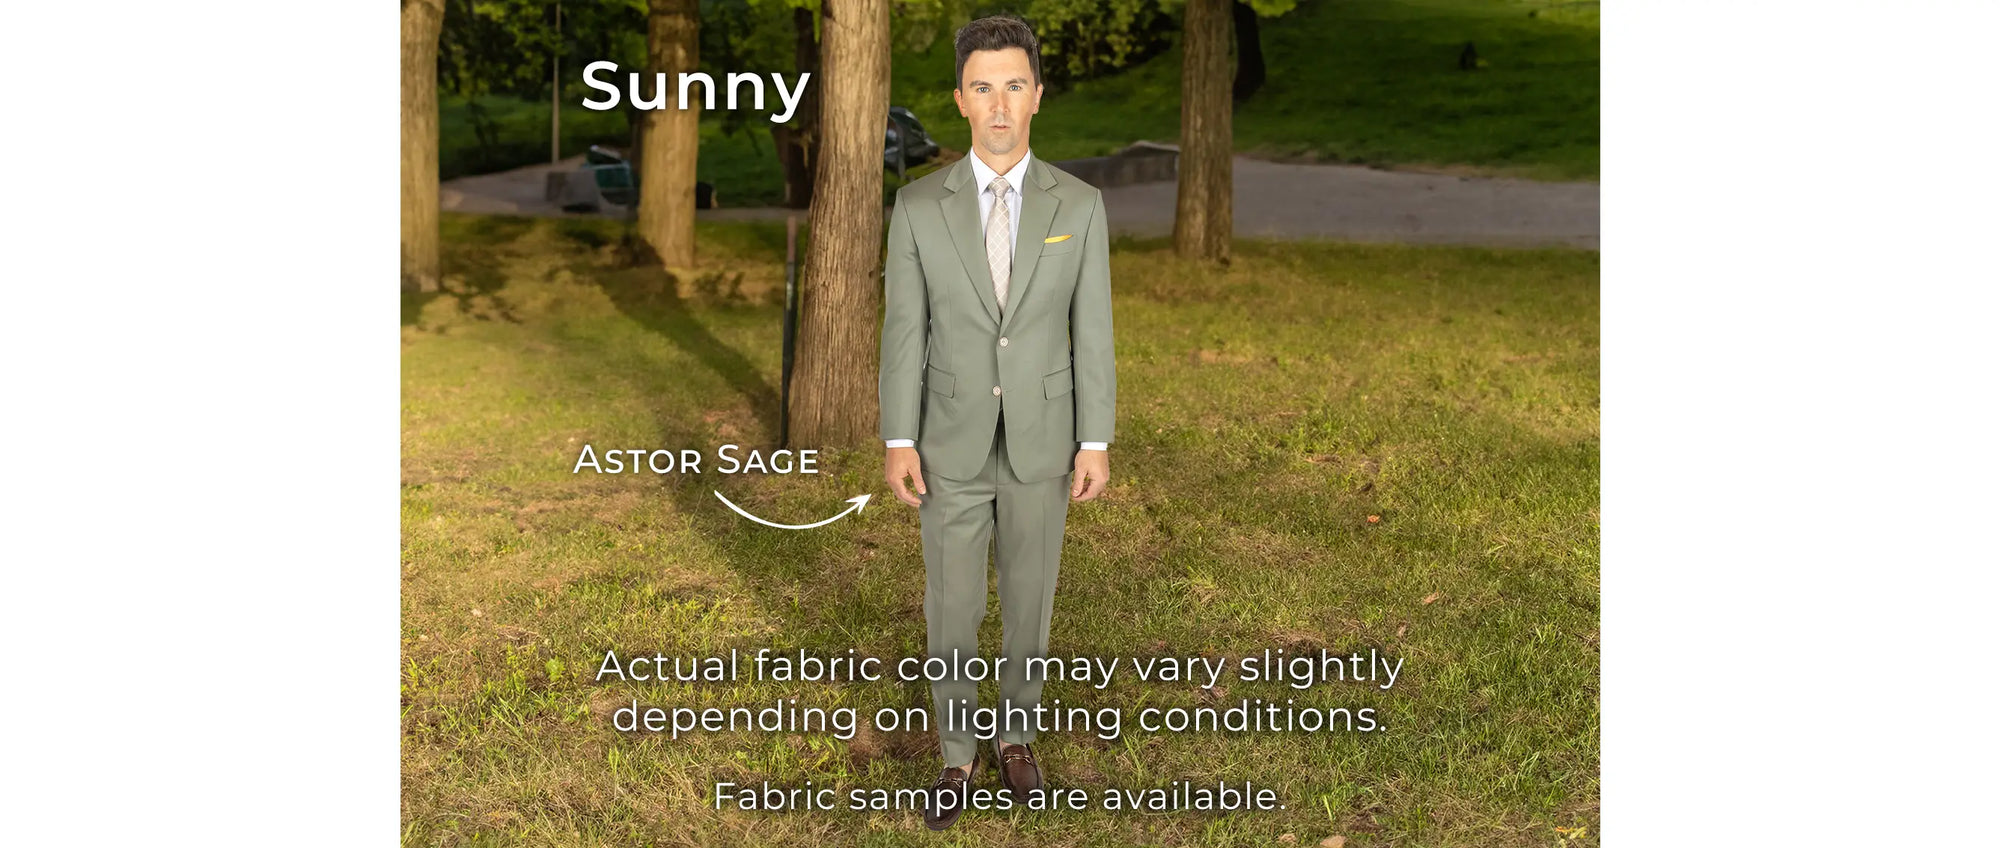 sage suit outdoors showing how it appears in sunny conditions